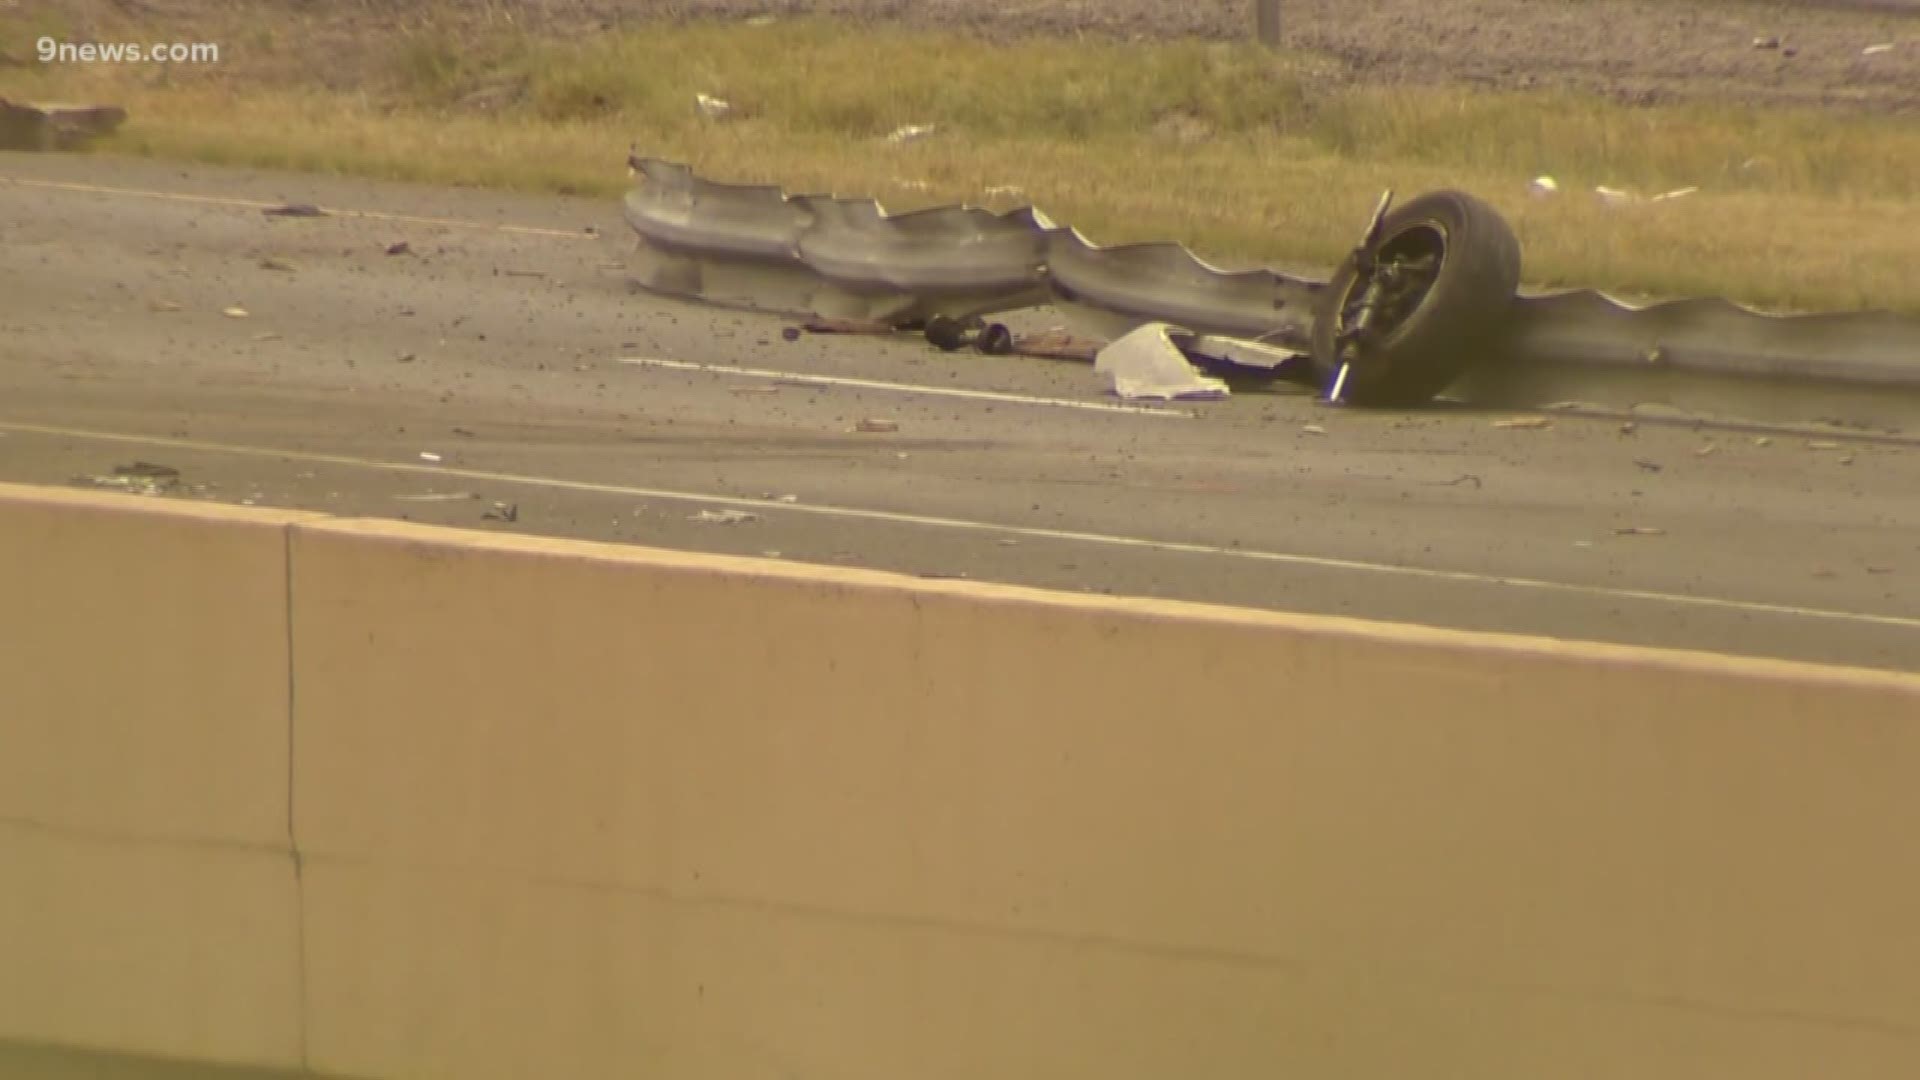 Two people were killed in the crash, which closed C-470 for hours.